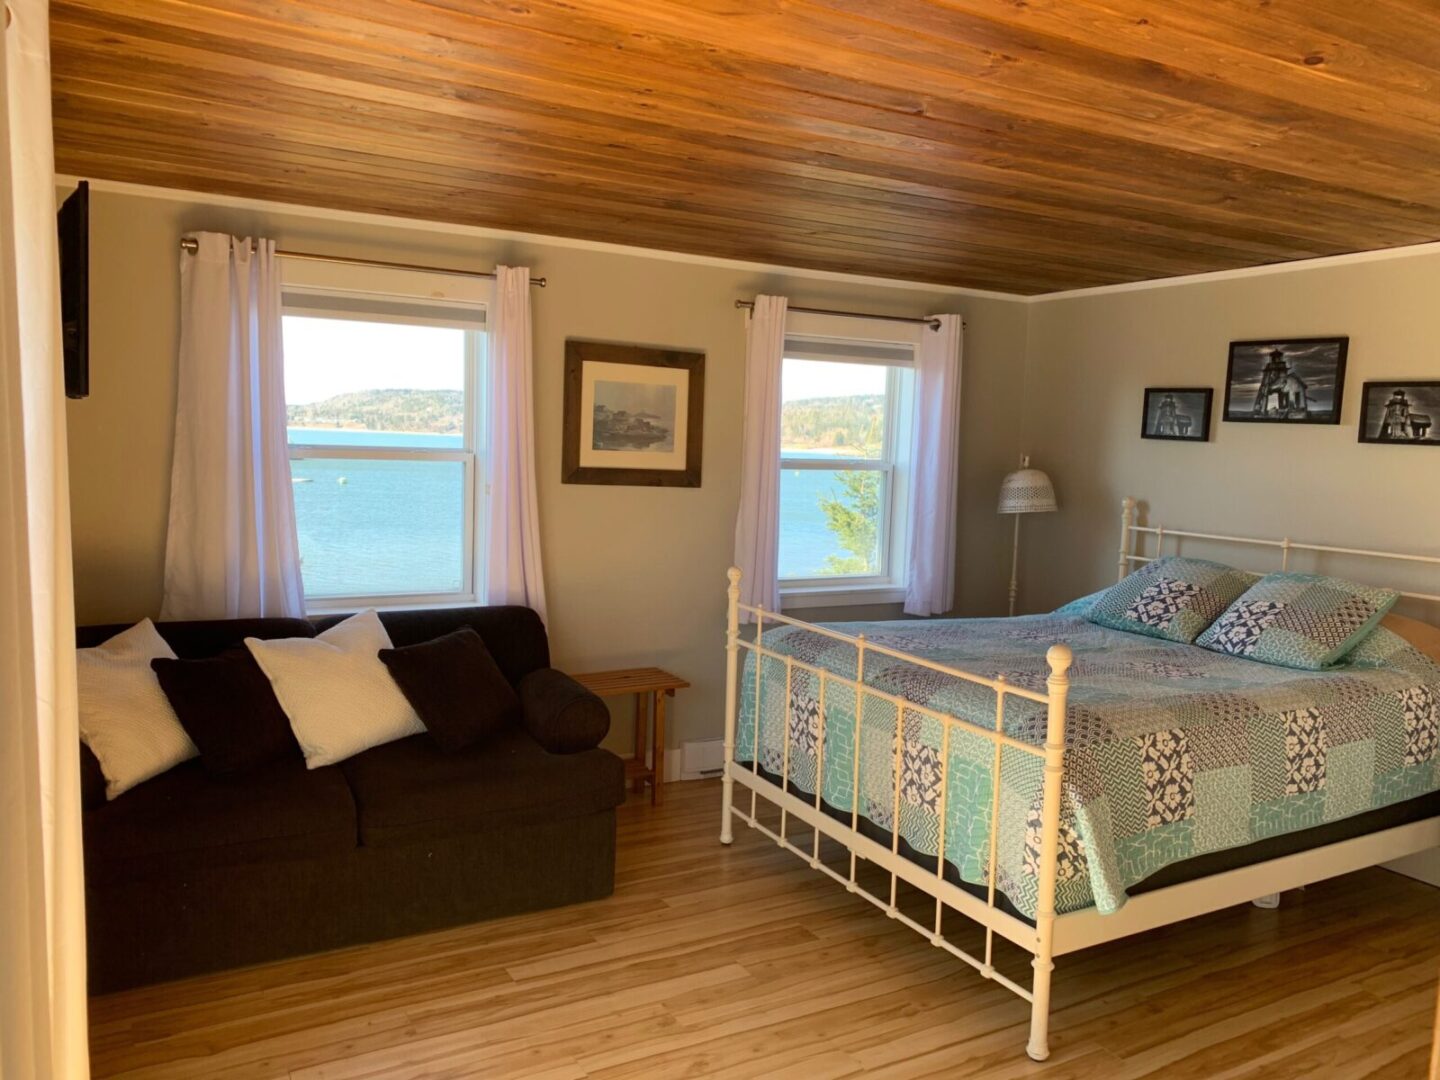 A bedroom with hardwood floors and a view of the ocean.